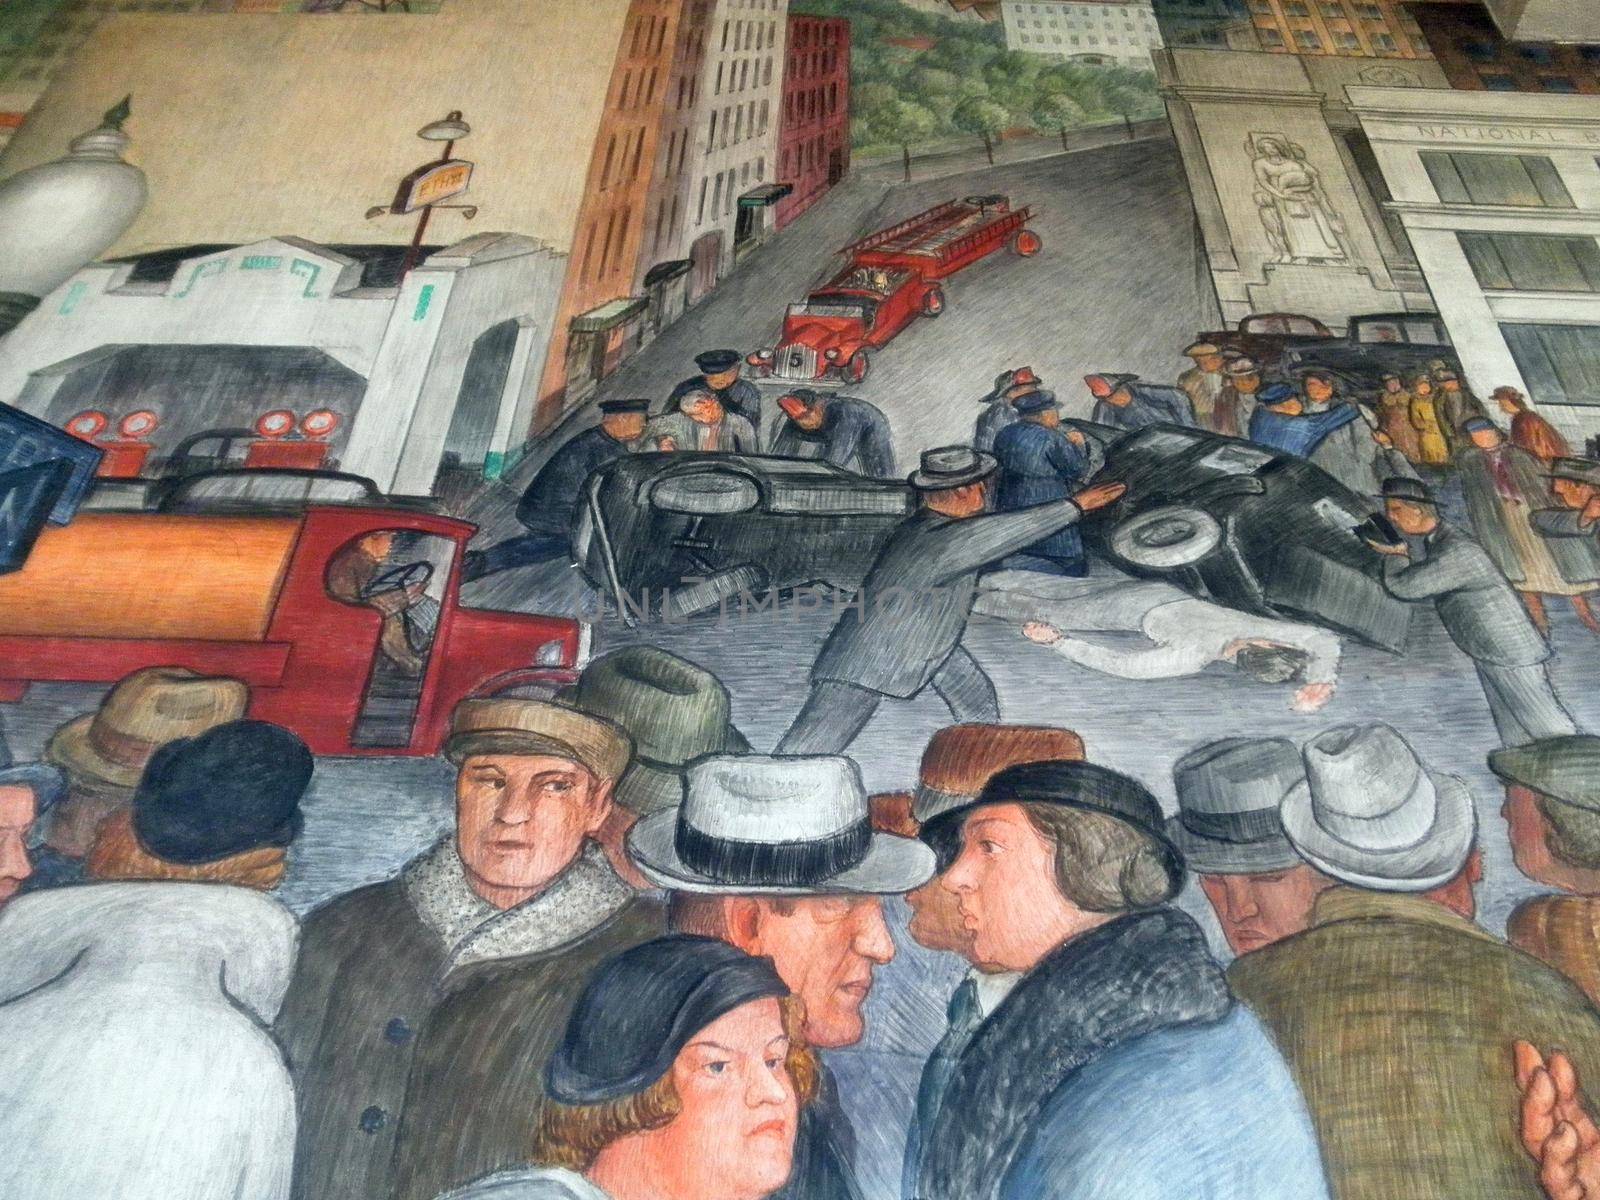 People direct and work on trains in Coit Tower Mural by EricGBVD